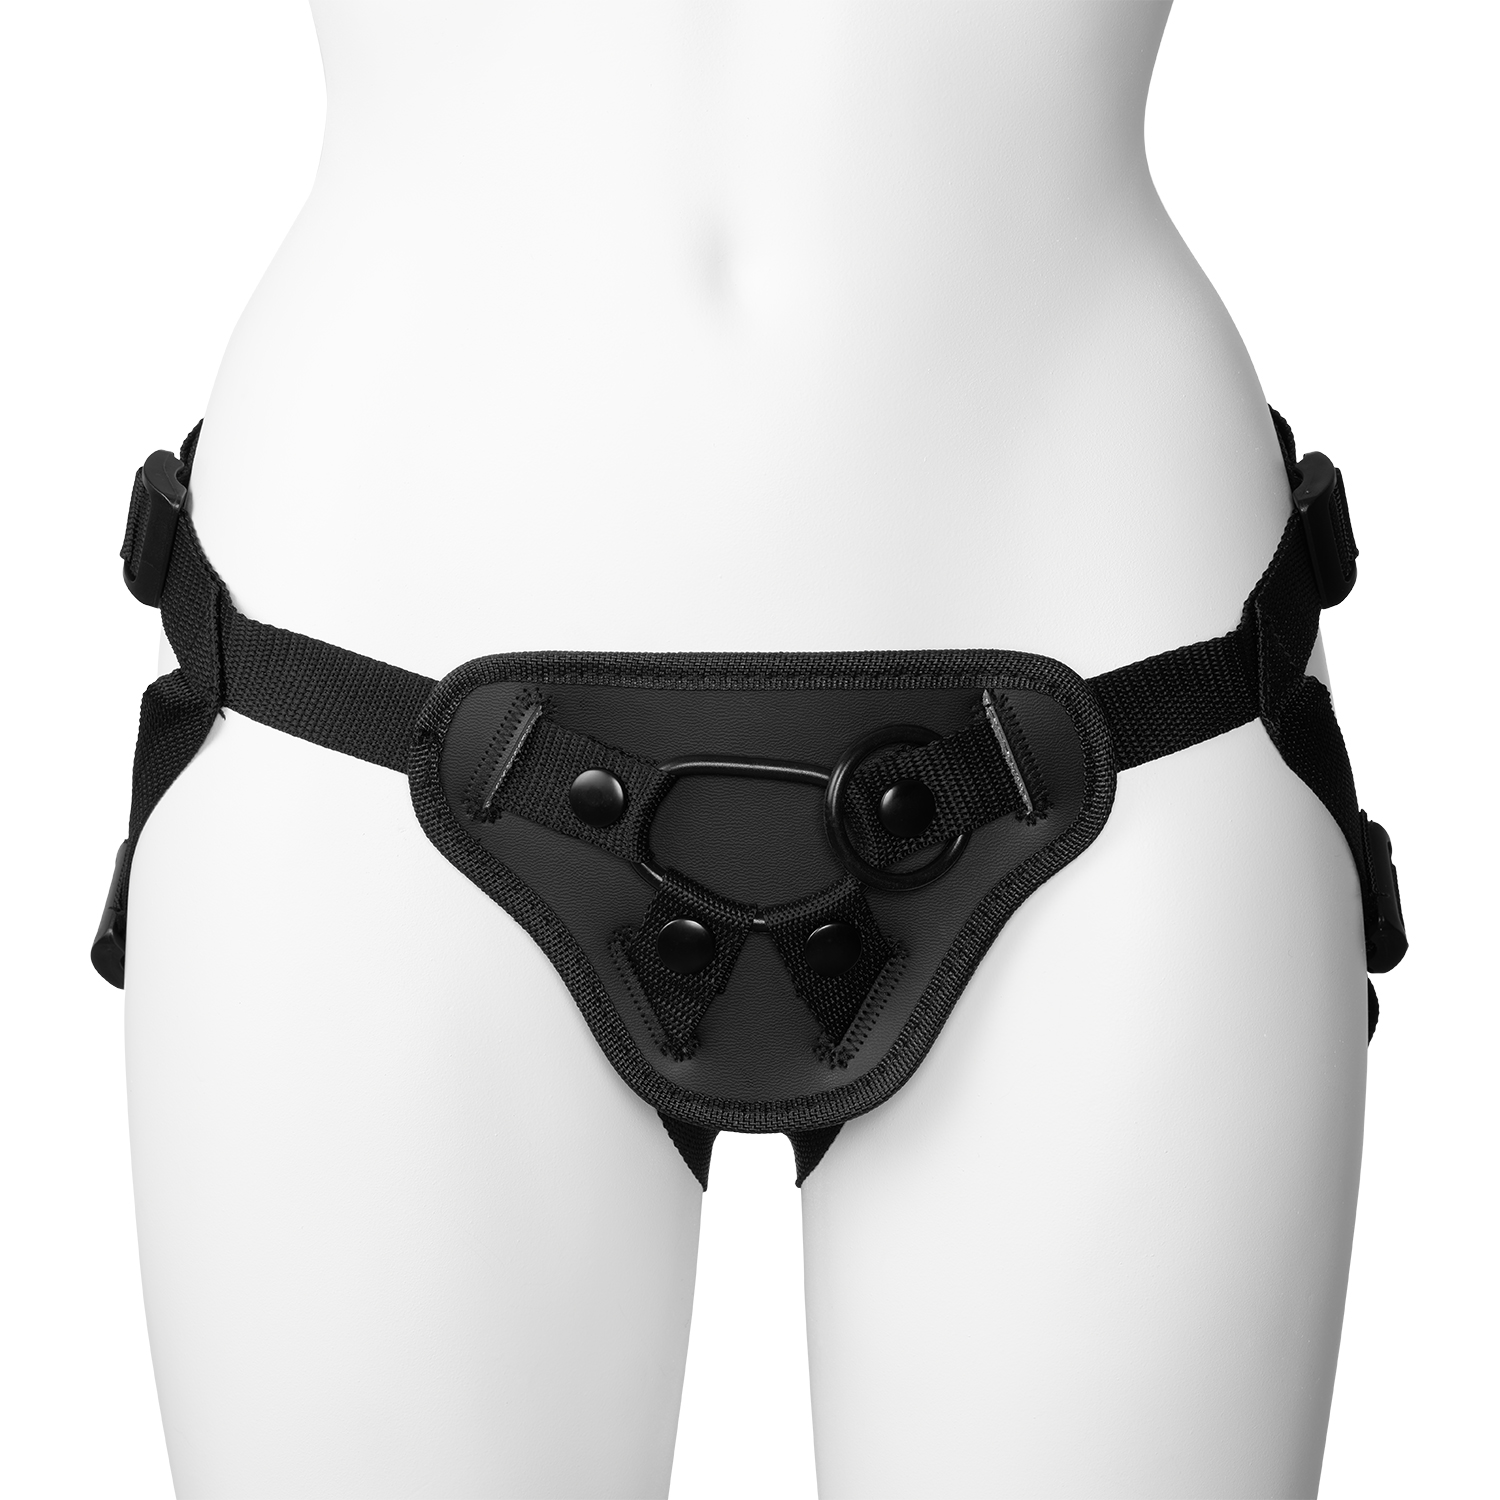 Obaie Unisex Strap-On Harness       - Sort thumbnail